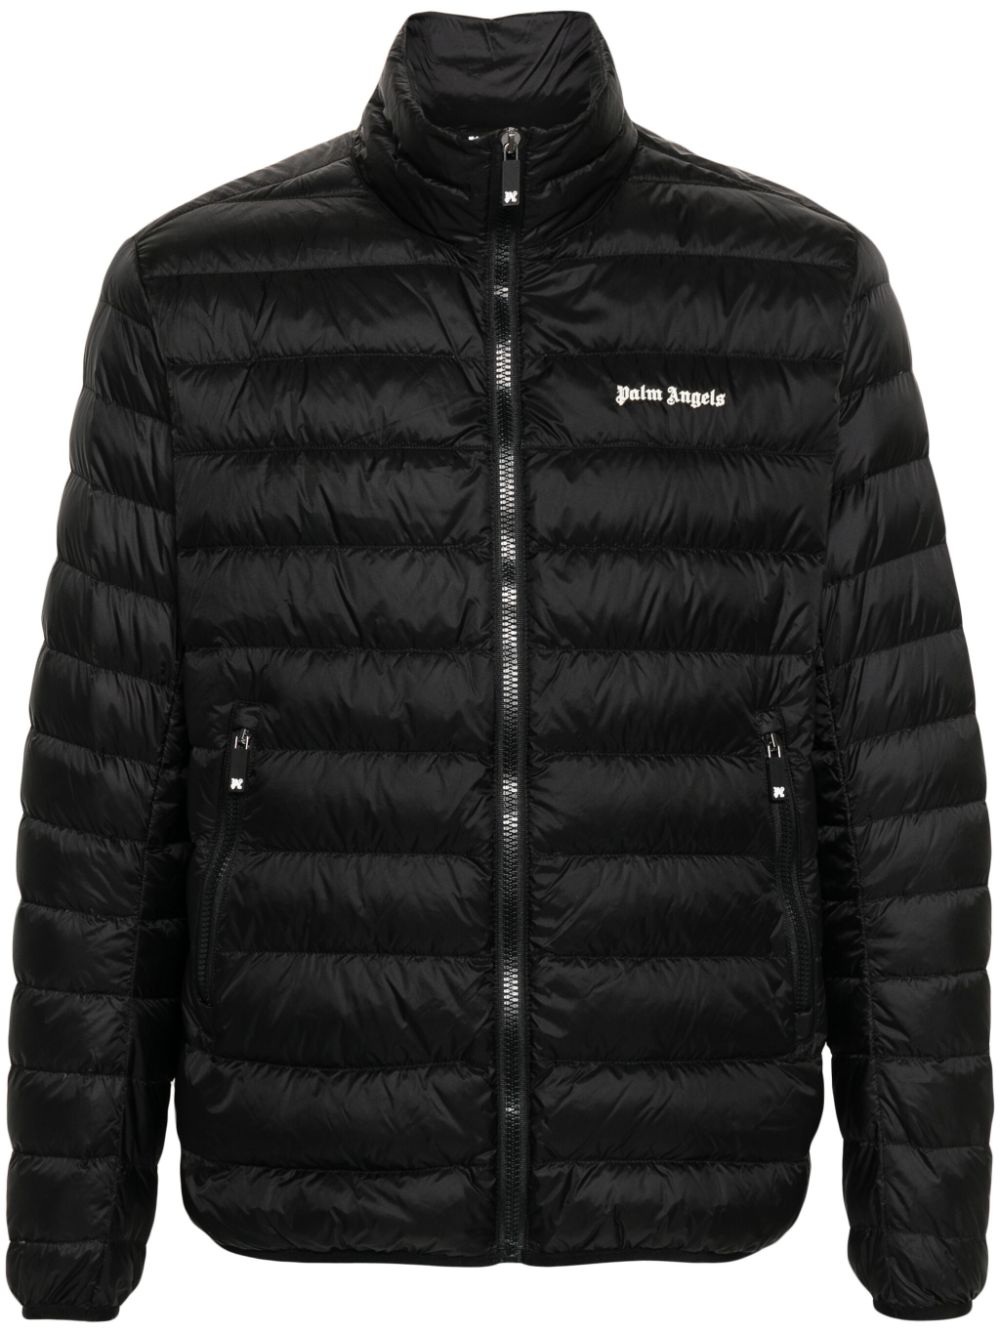 PALM ANGELS Men's Black Full-Zip Down Jacket with Adjustable Drawstring - SS24